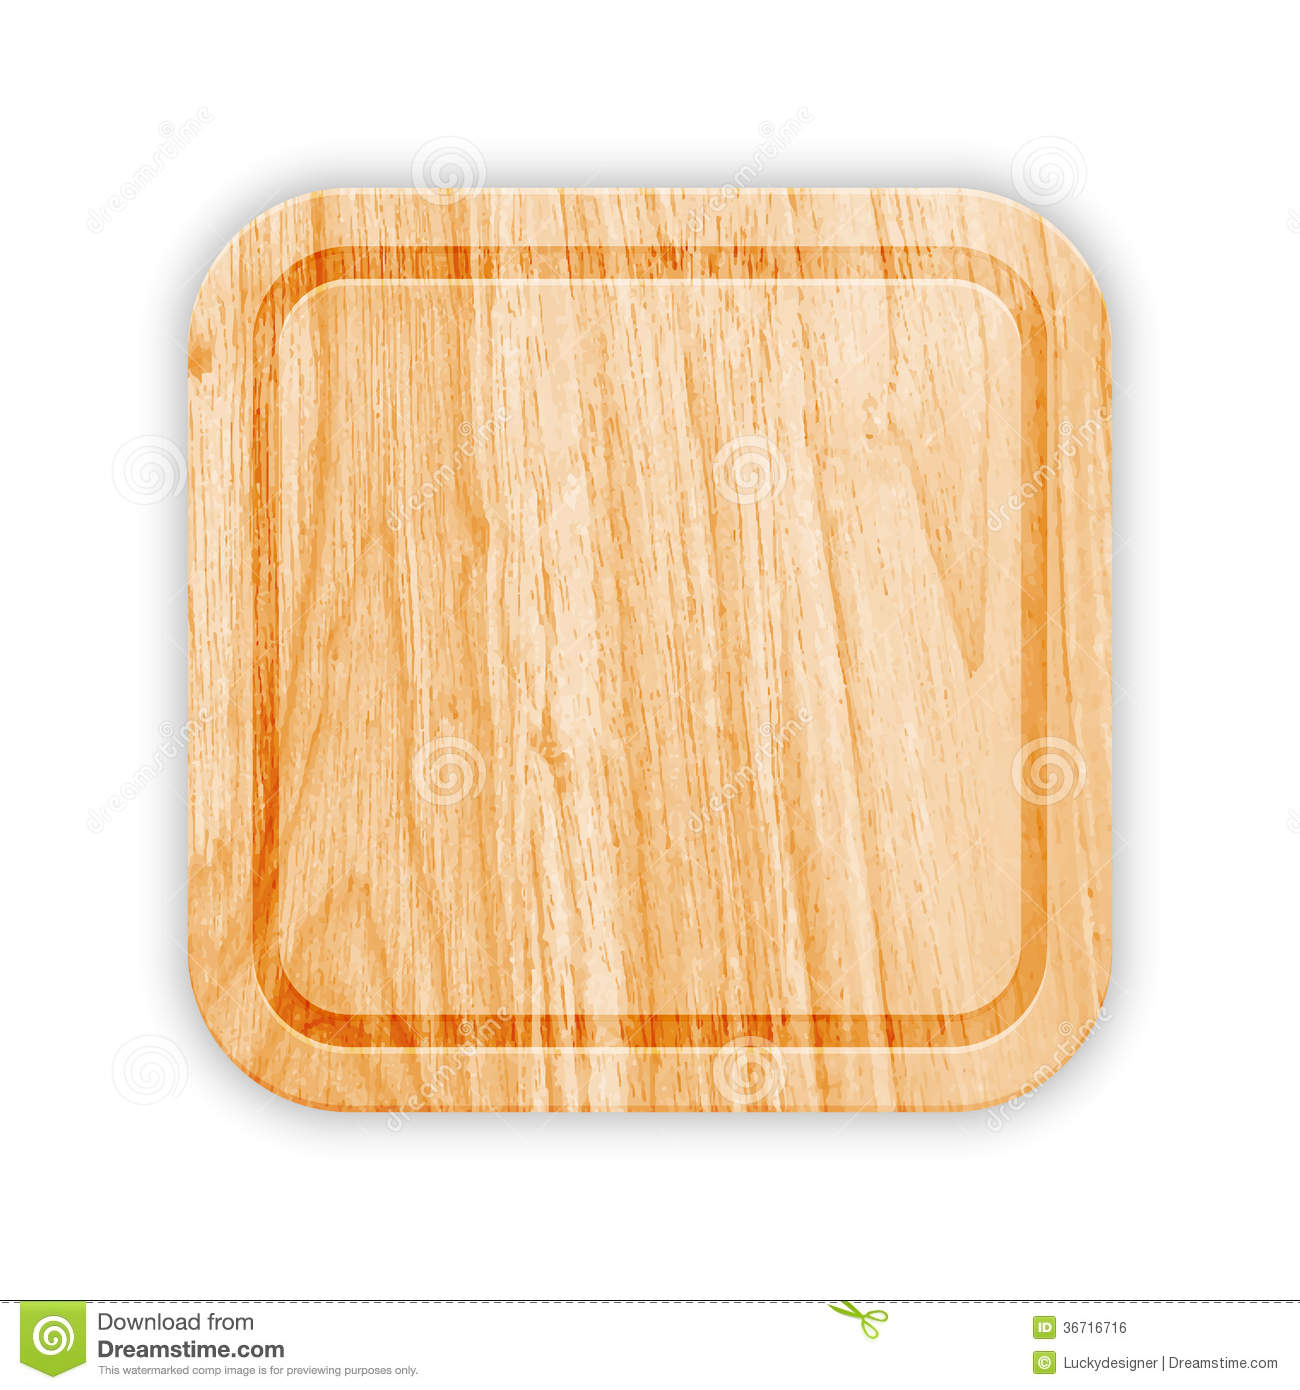 Wooden Cutting Board with Grooves